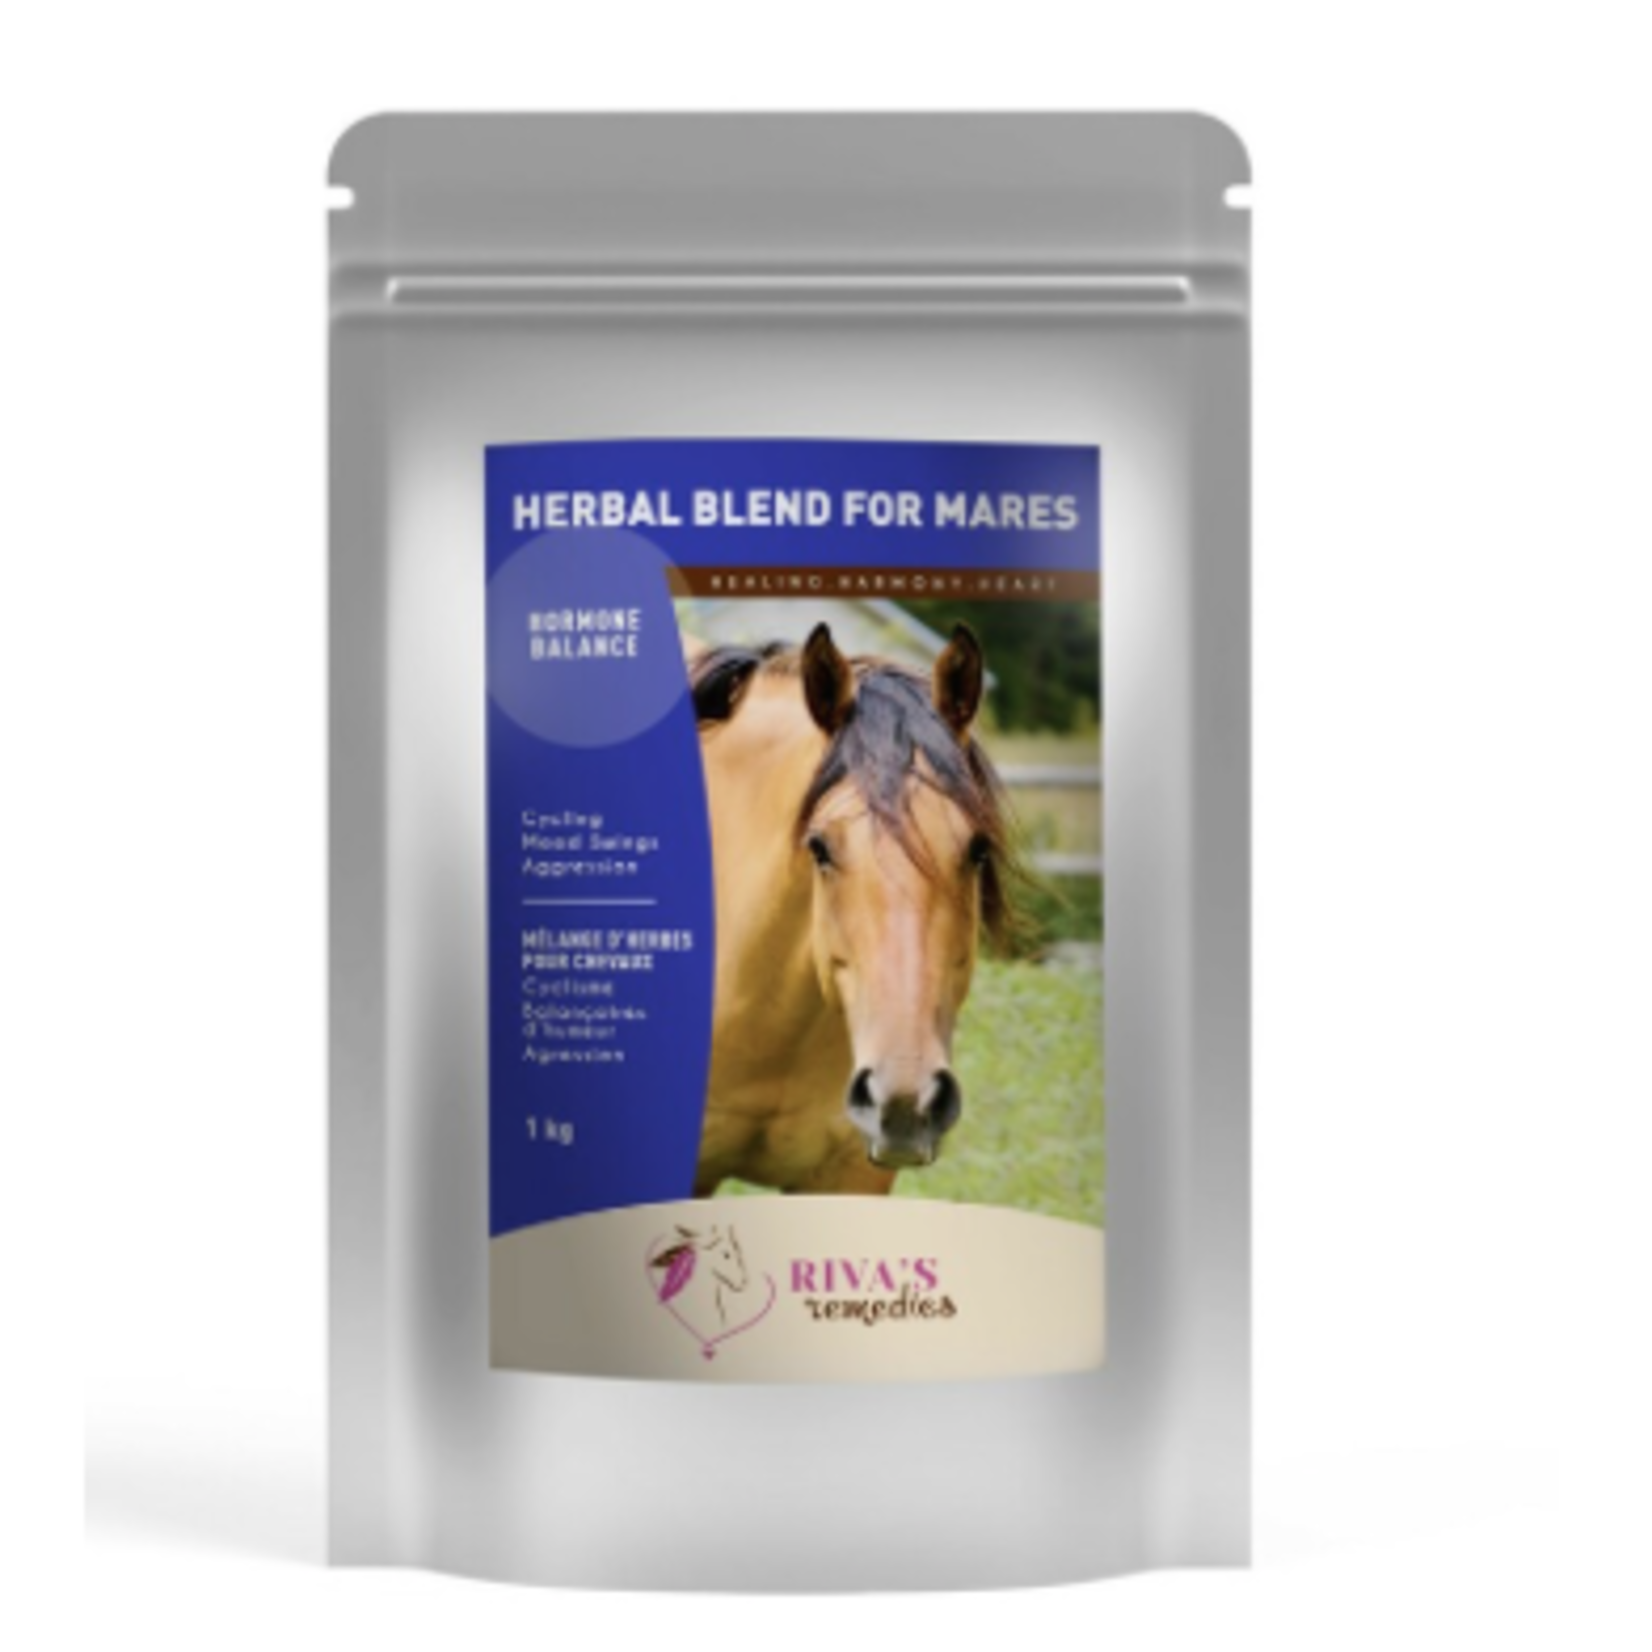 Riva's Remedies Riva's Remedies herbal blend for mares 1kg